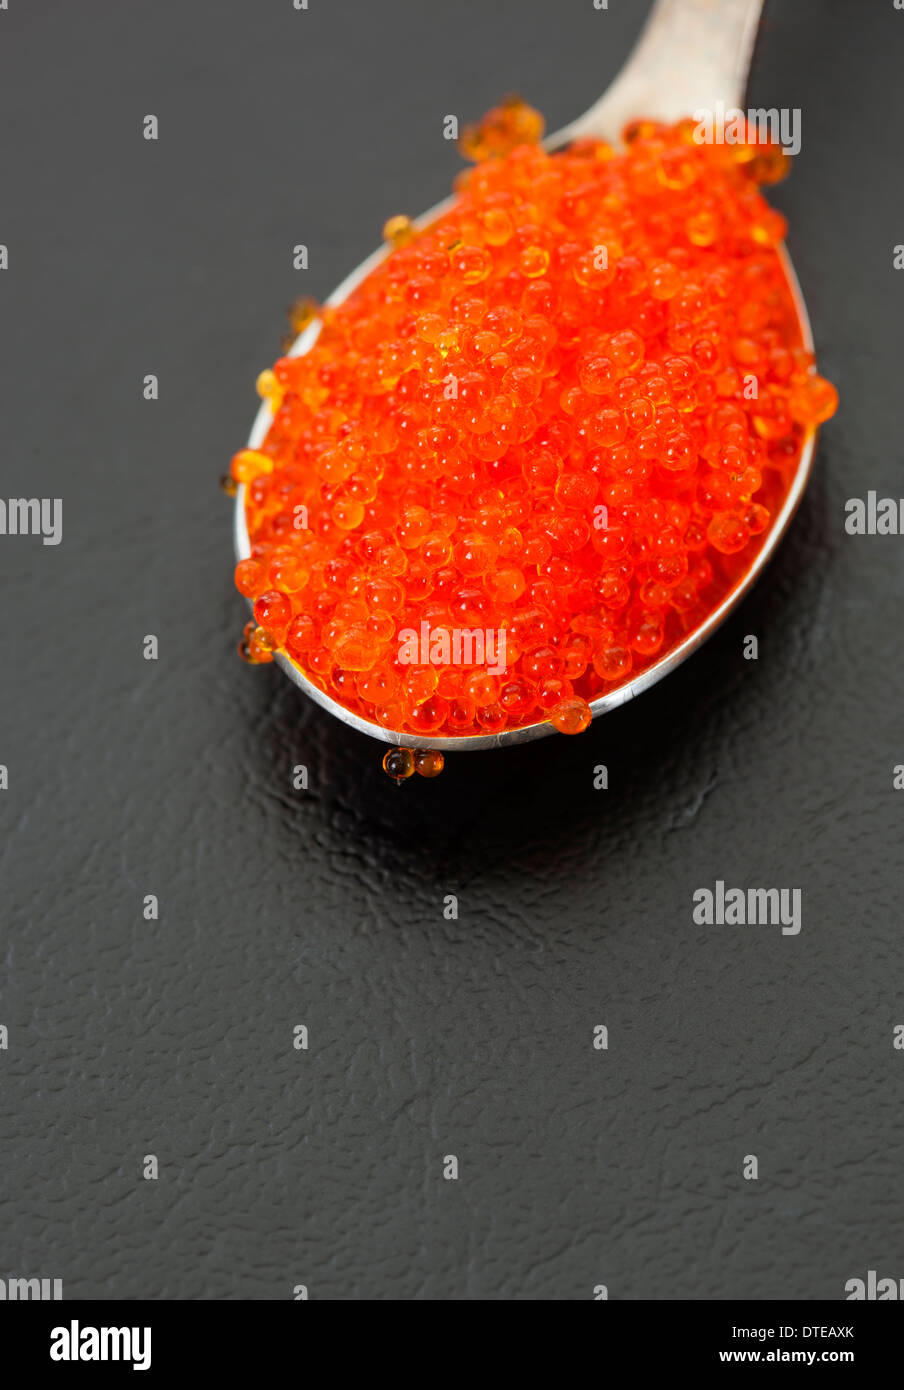 https://c8.alamy.com/comp/DTEAXK/tobiko-or-flying-fish-roe-an-example-of-the-strange-or-weird-food-DTEAXK.jpg